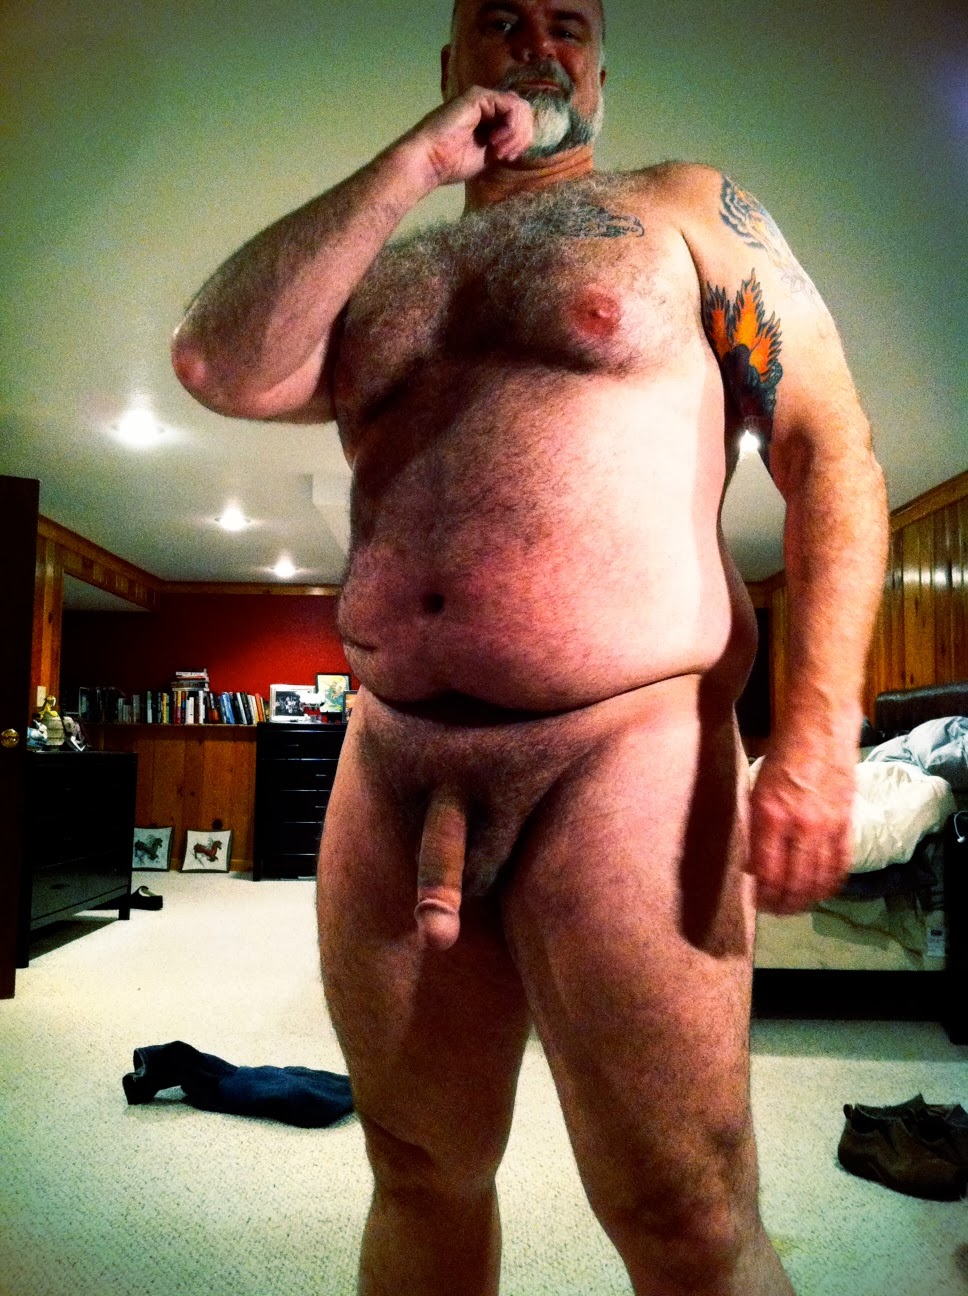 Thick fat uncut fat hairy daddy dick xnxx - Best adult videos and photos.